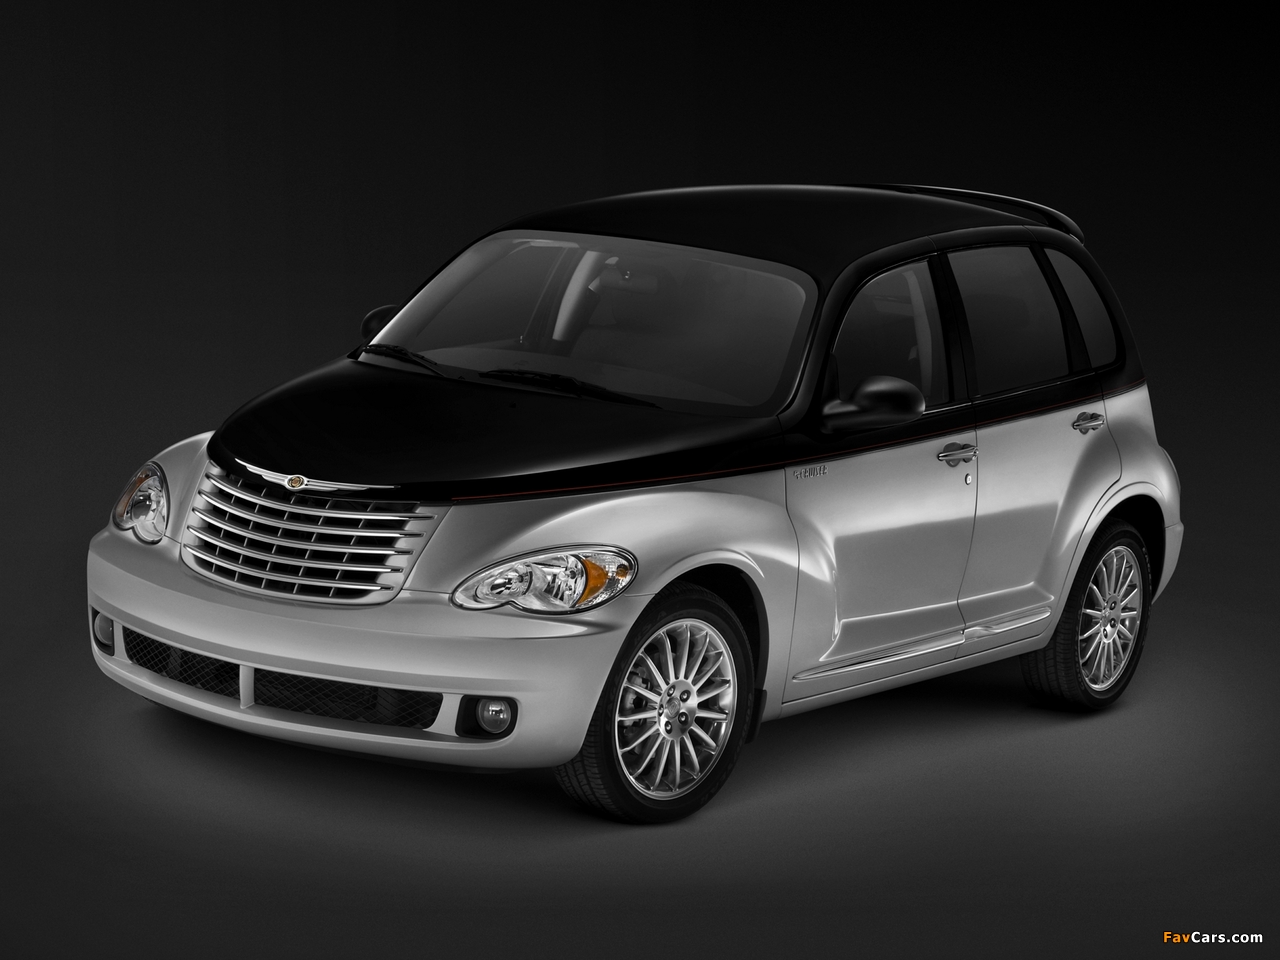 Chrysler PT Cruiser Couture Edition 2010 images (1280 x 960)